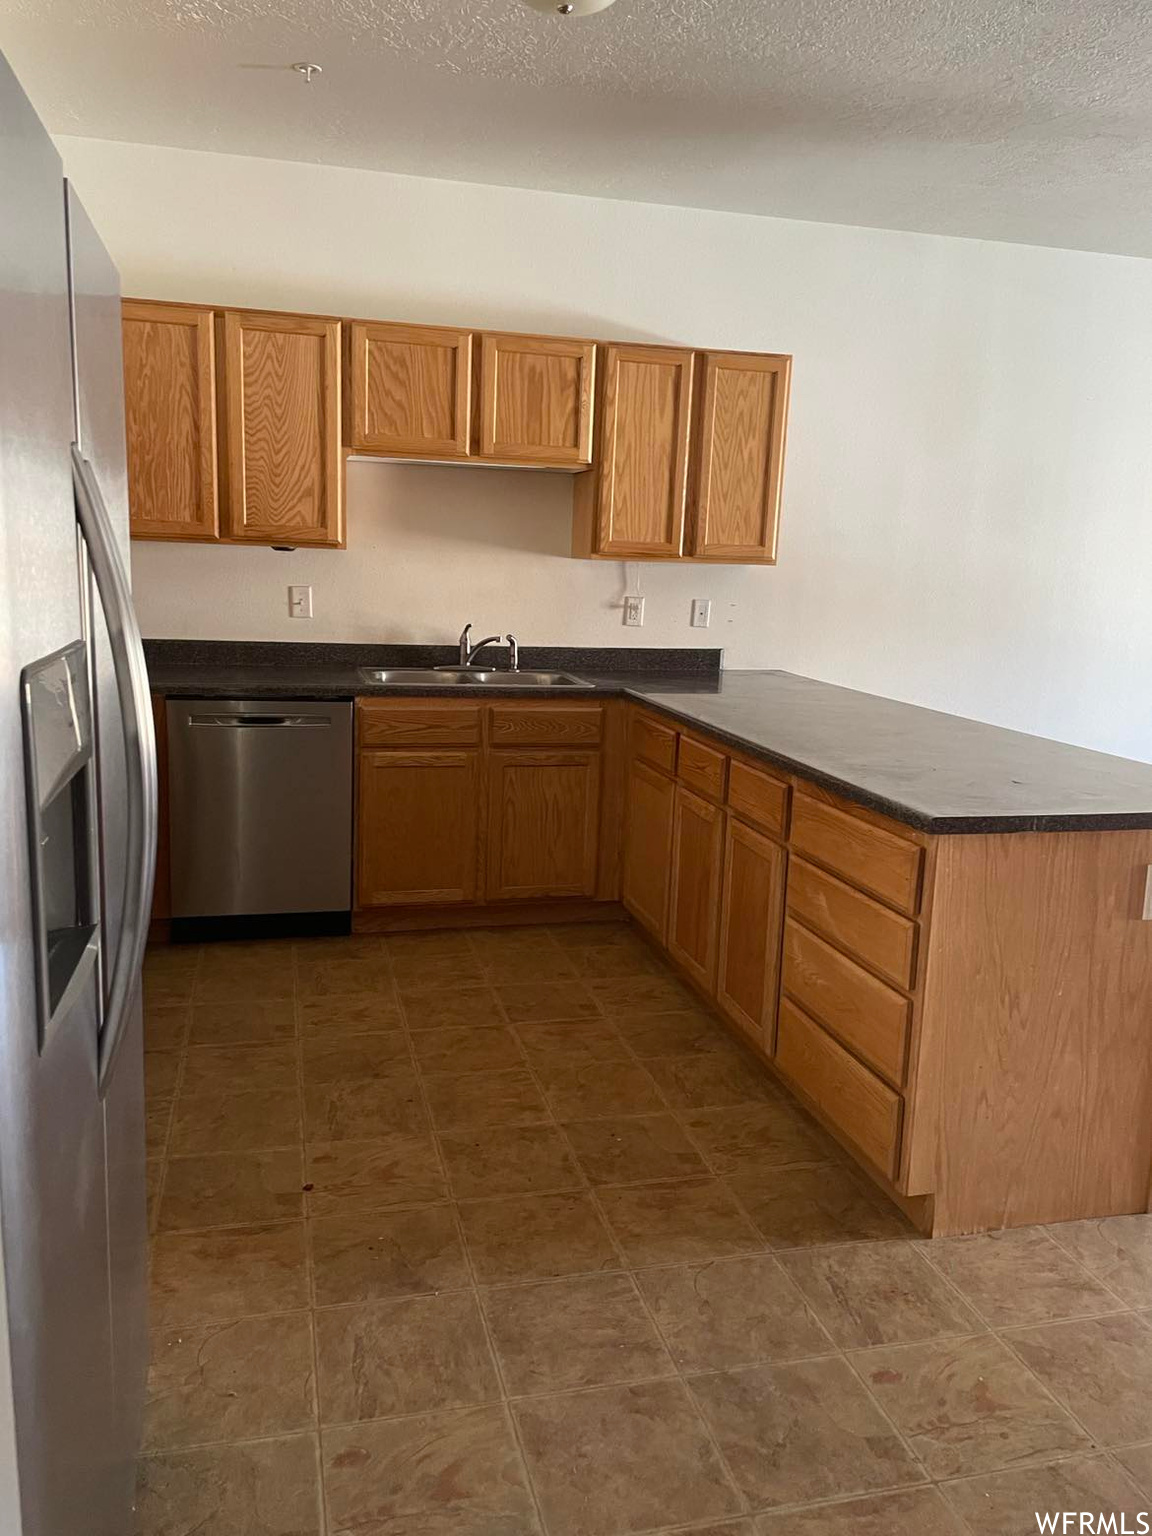 Kitchen featuring tile flooring, stainless steel dishwasher, refrigerator, and brown cabinets